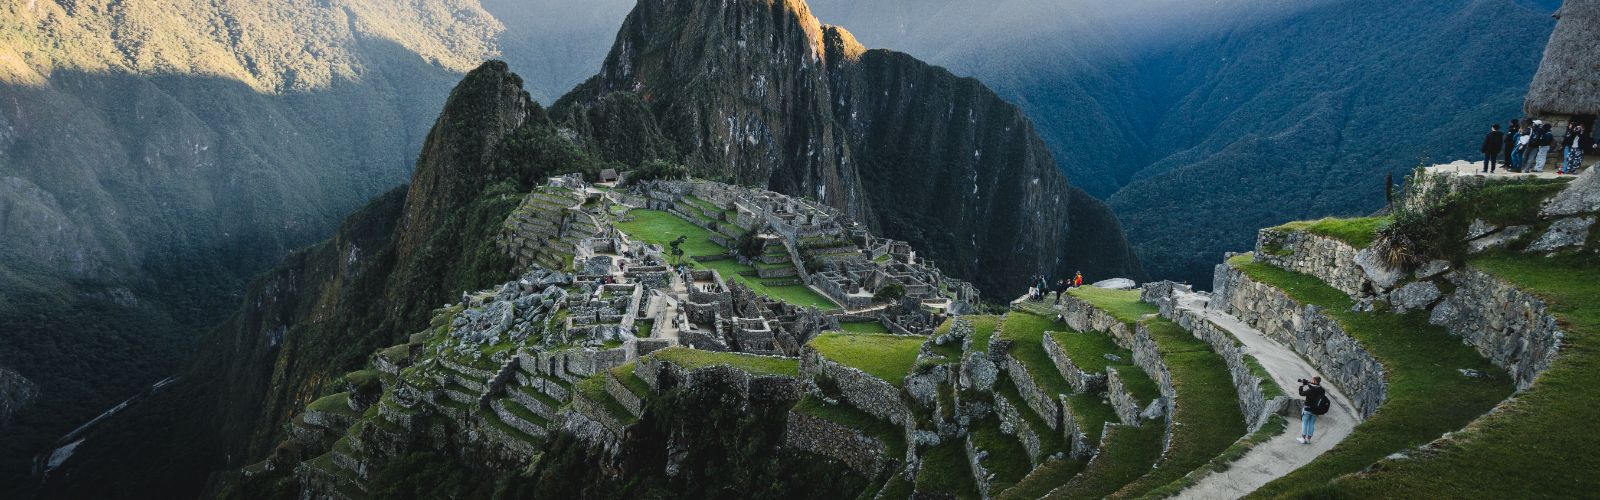 7 Reasons Why Peru is Great for NGO Internships